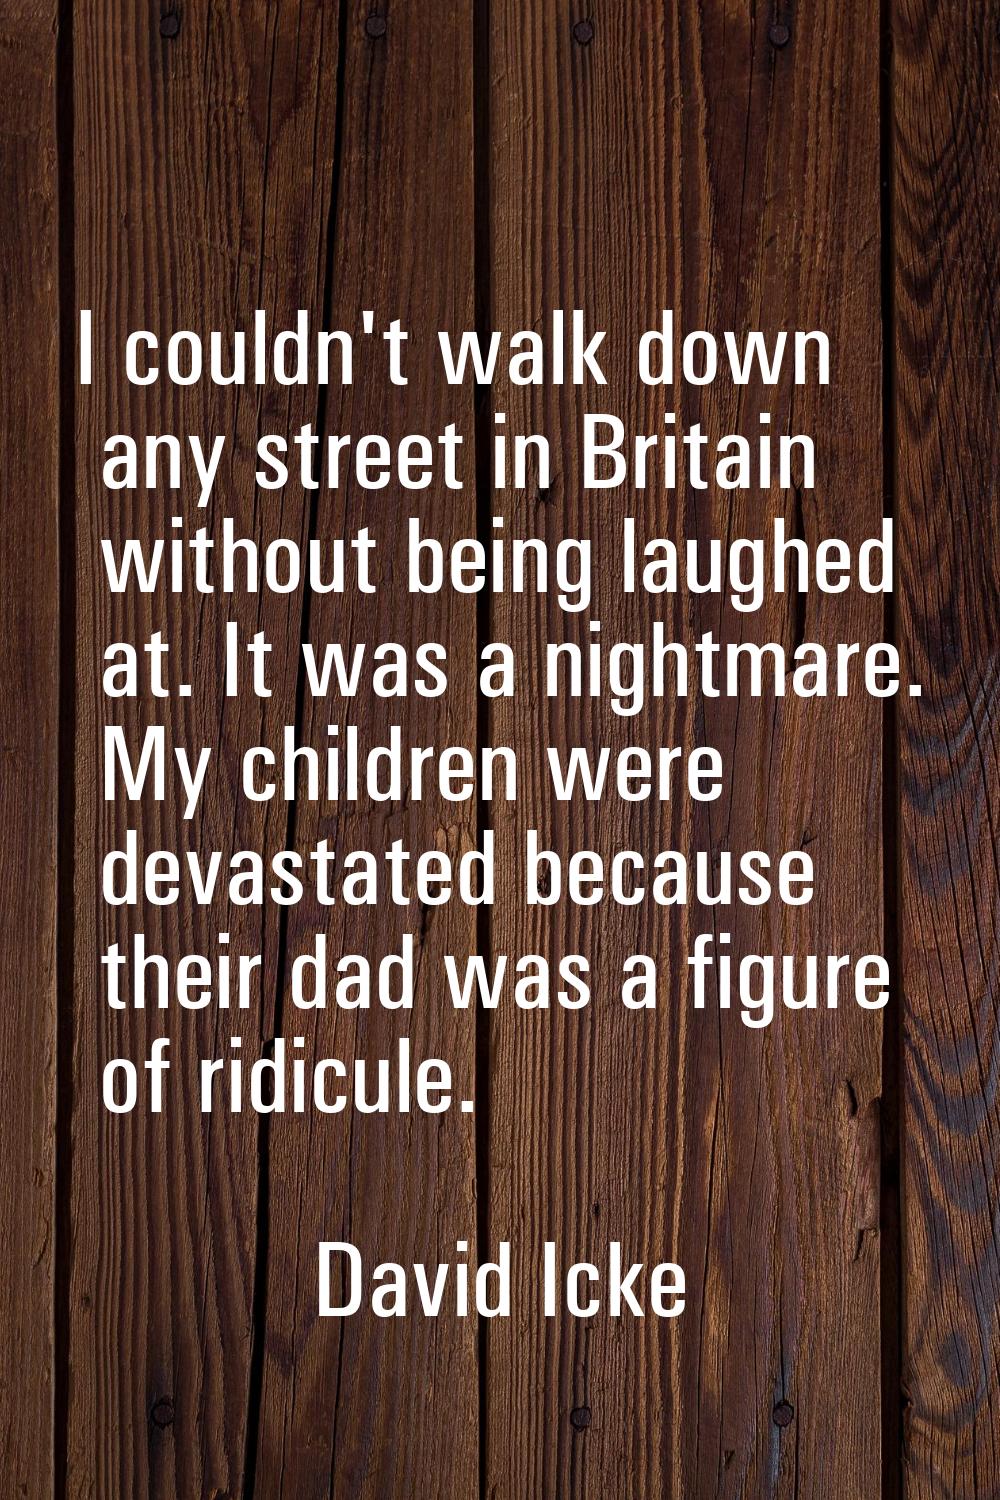 I couldn't walk down any street in Britain without being laughed at. It was a nightmare. My childre